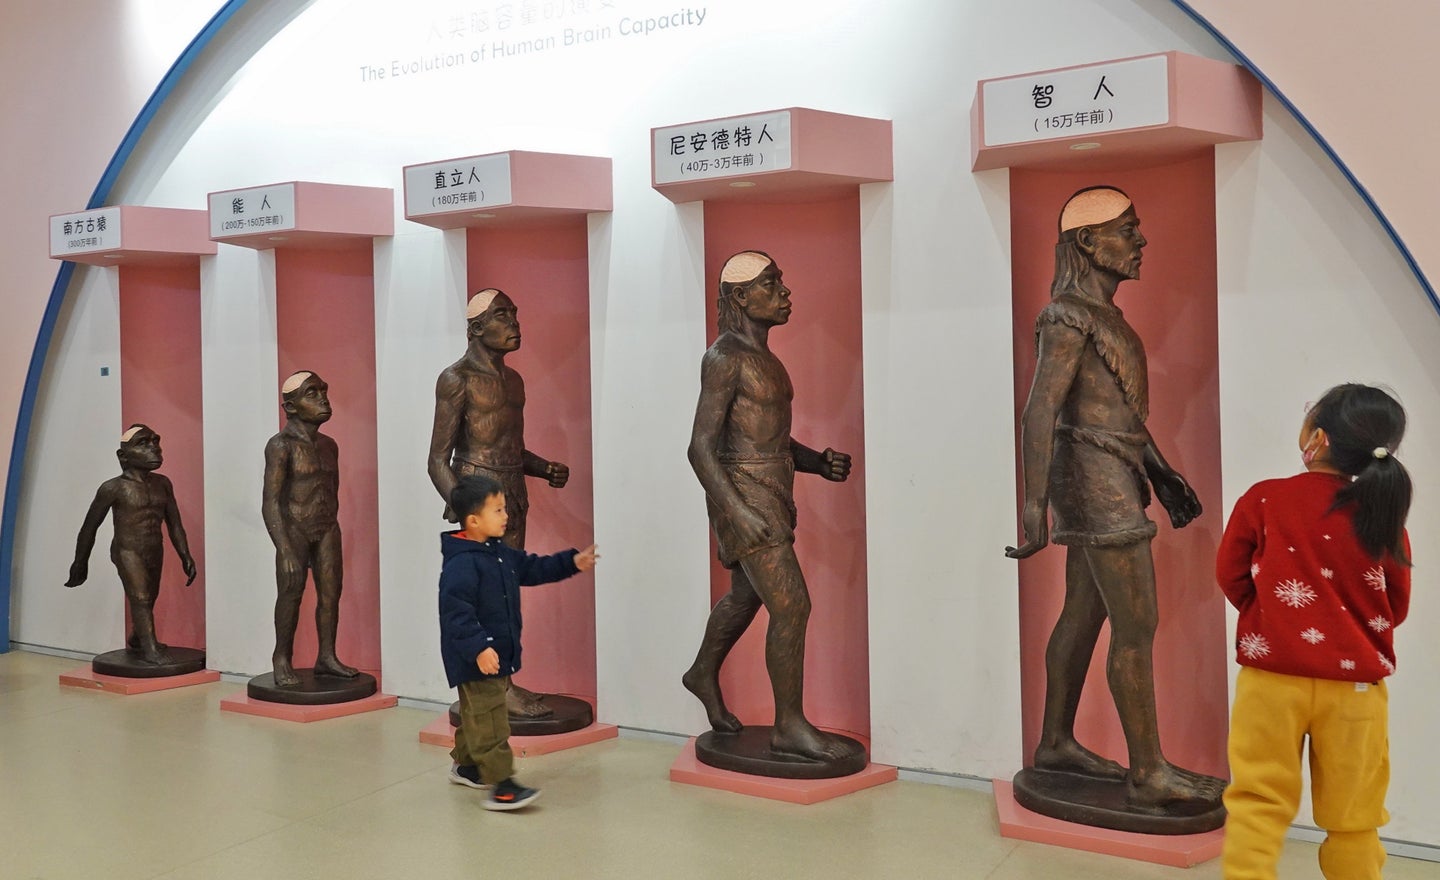 Evolution of human brain size shown with brass sculptures at a kids science museum in China